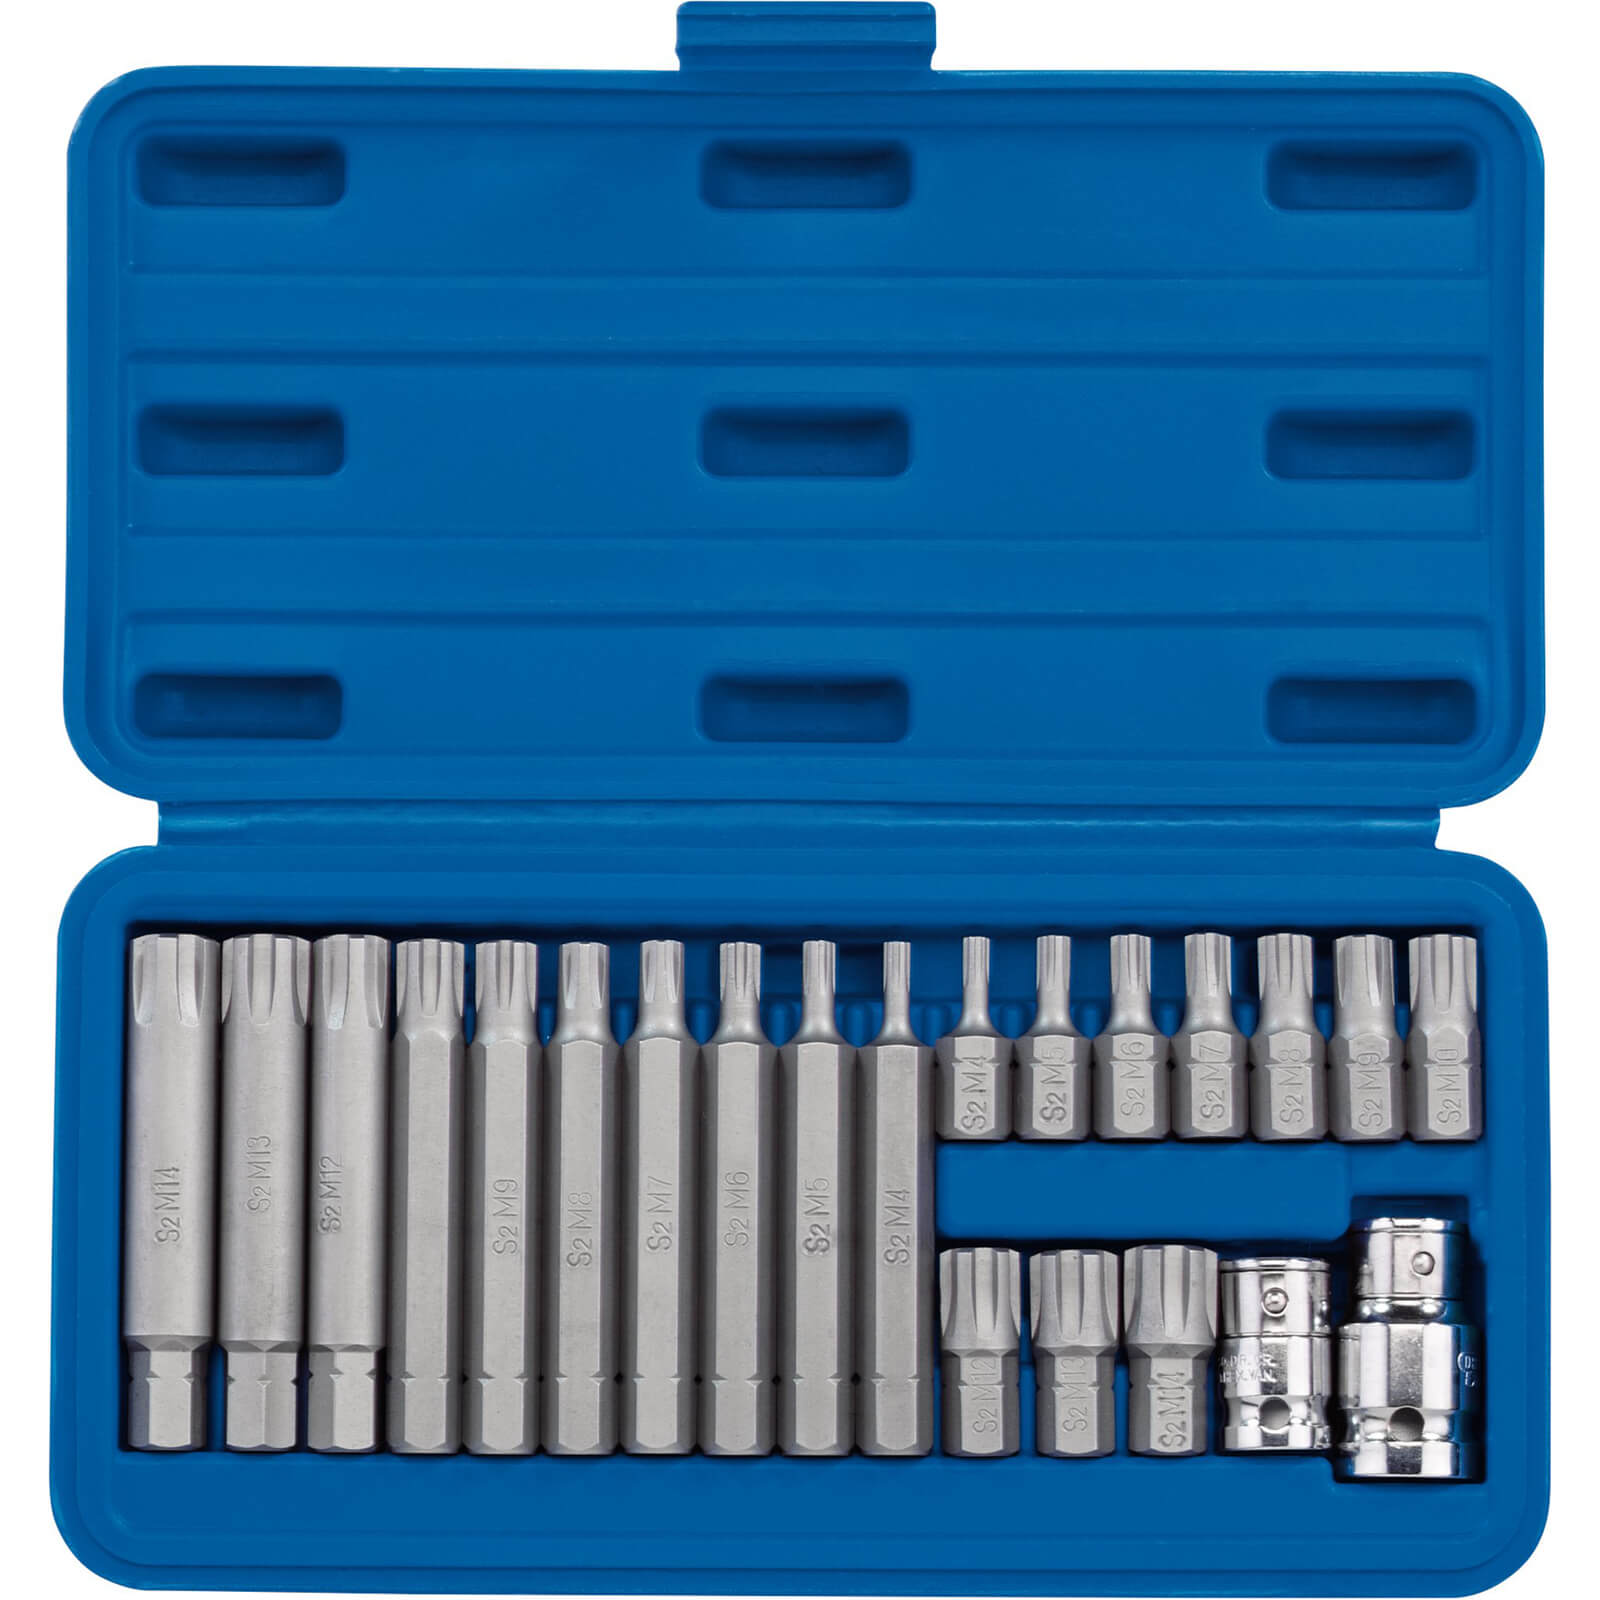 Image of Draper 22 Piece 3/8" and 1/2" Drive Ribe Socket and Bit Set Combination 100mm